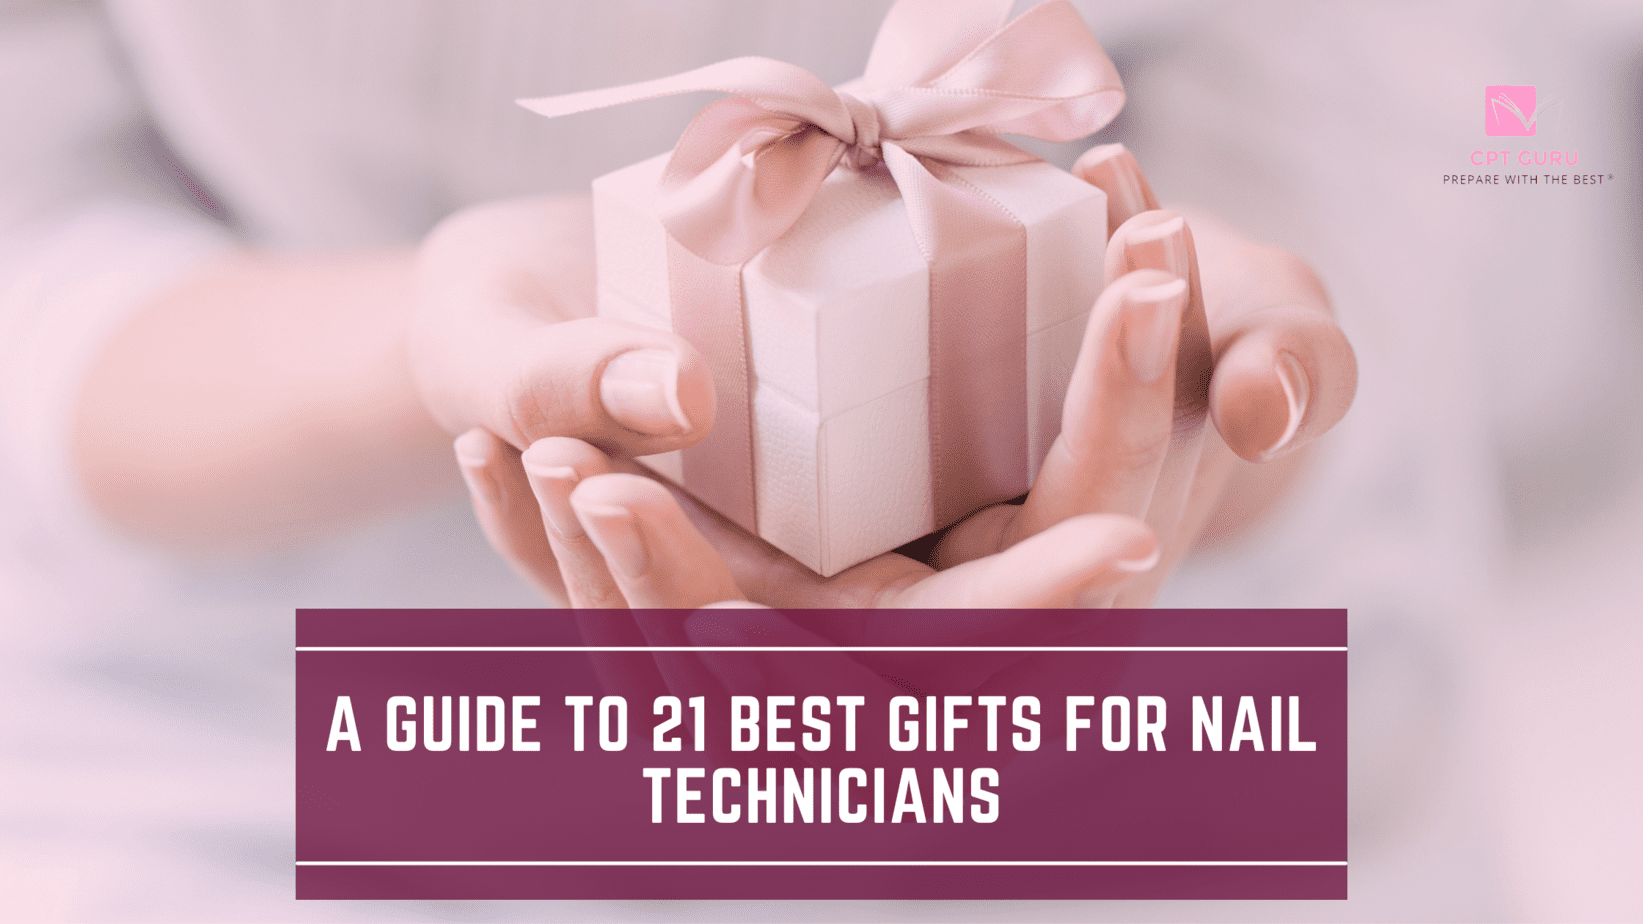 Best gifts for nail technicians